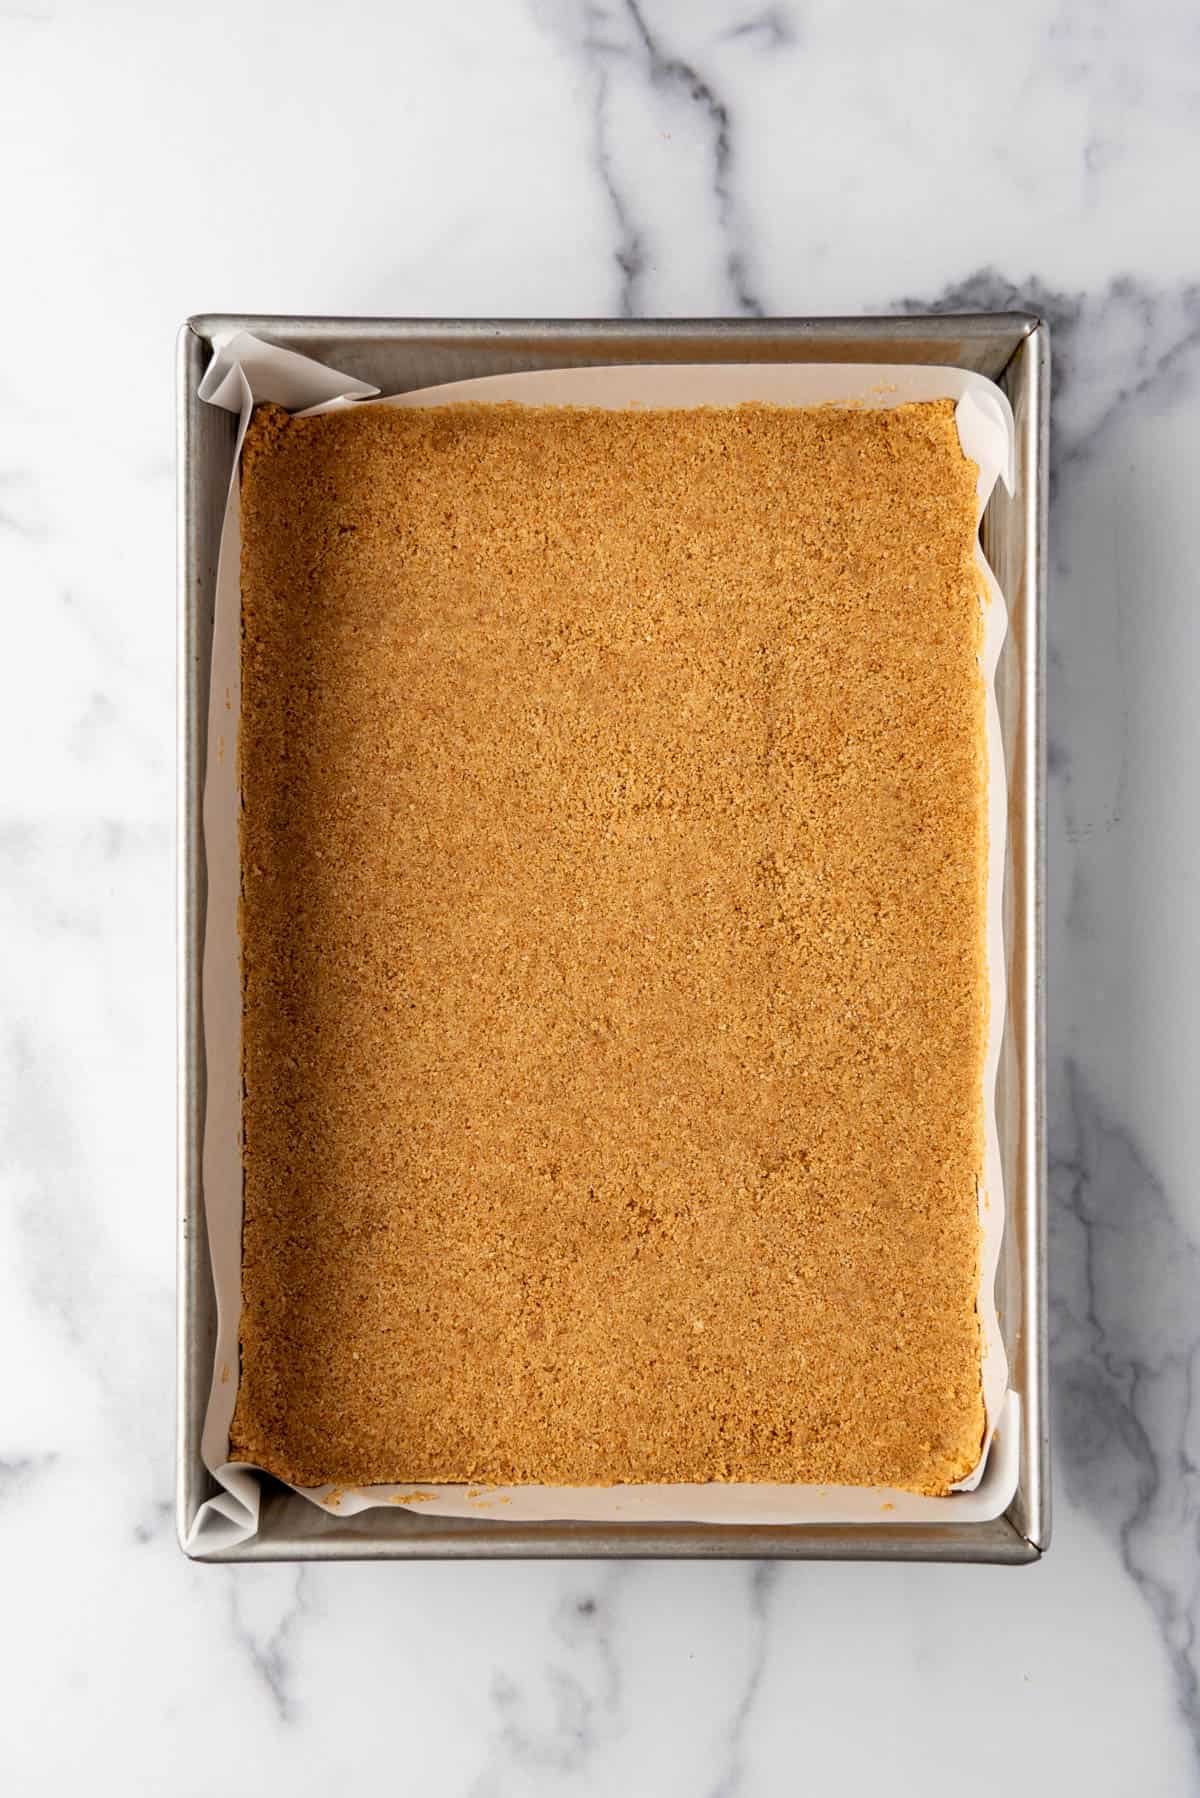 Pressing a graham cracker crust into a 9x13-inch baking dish.